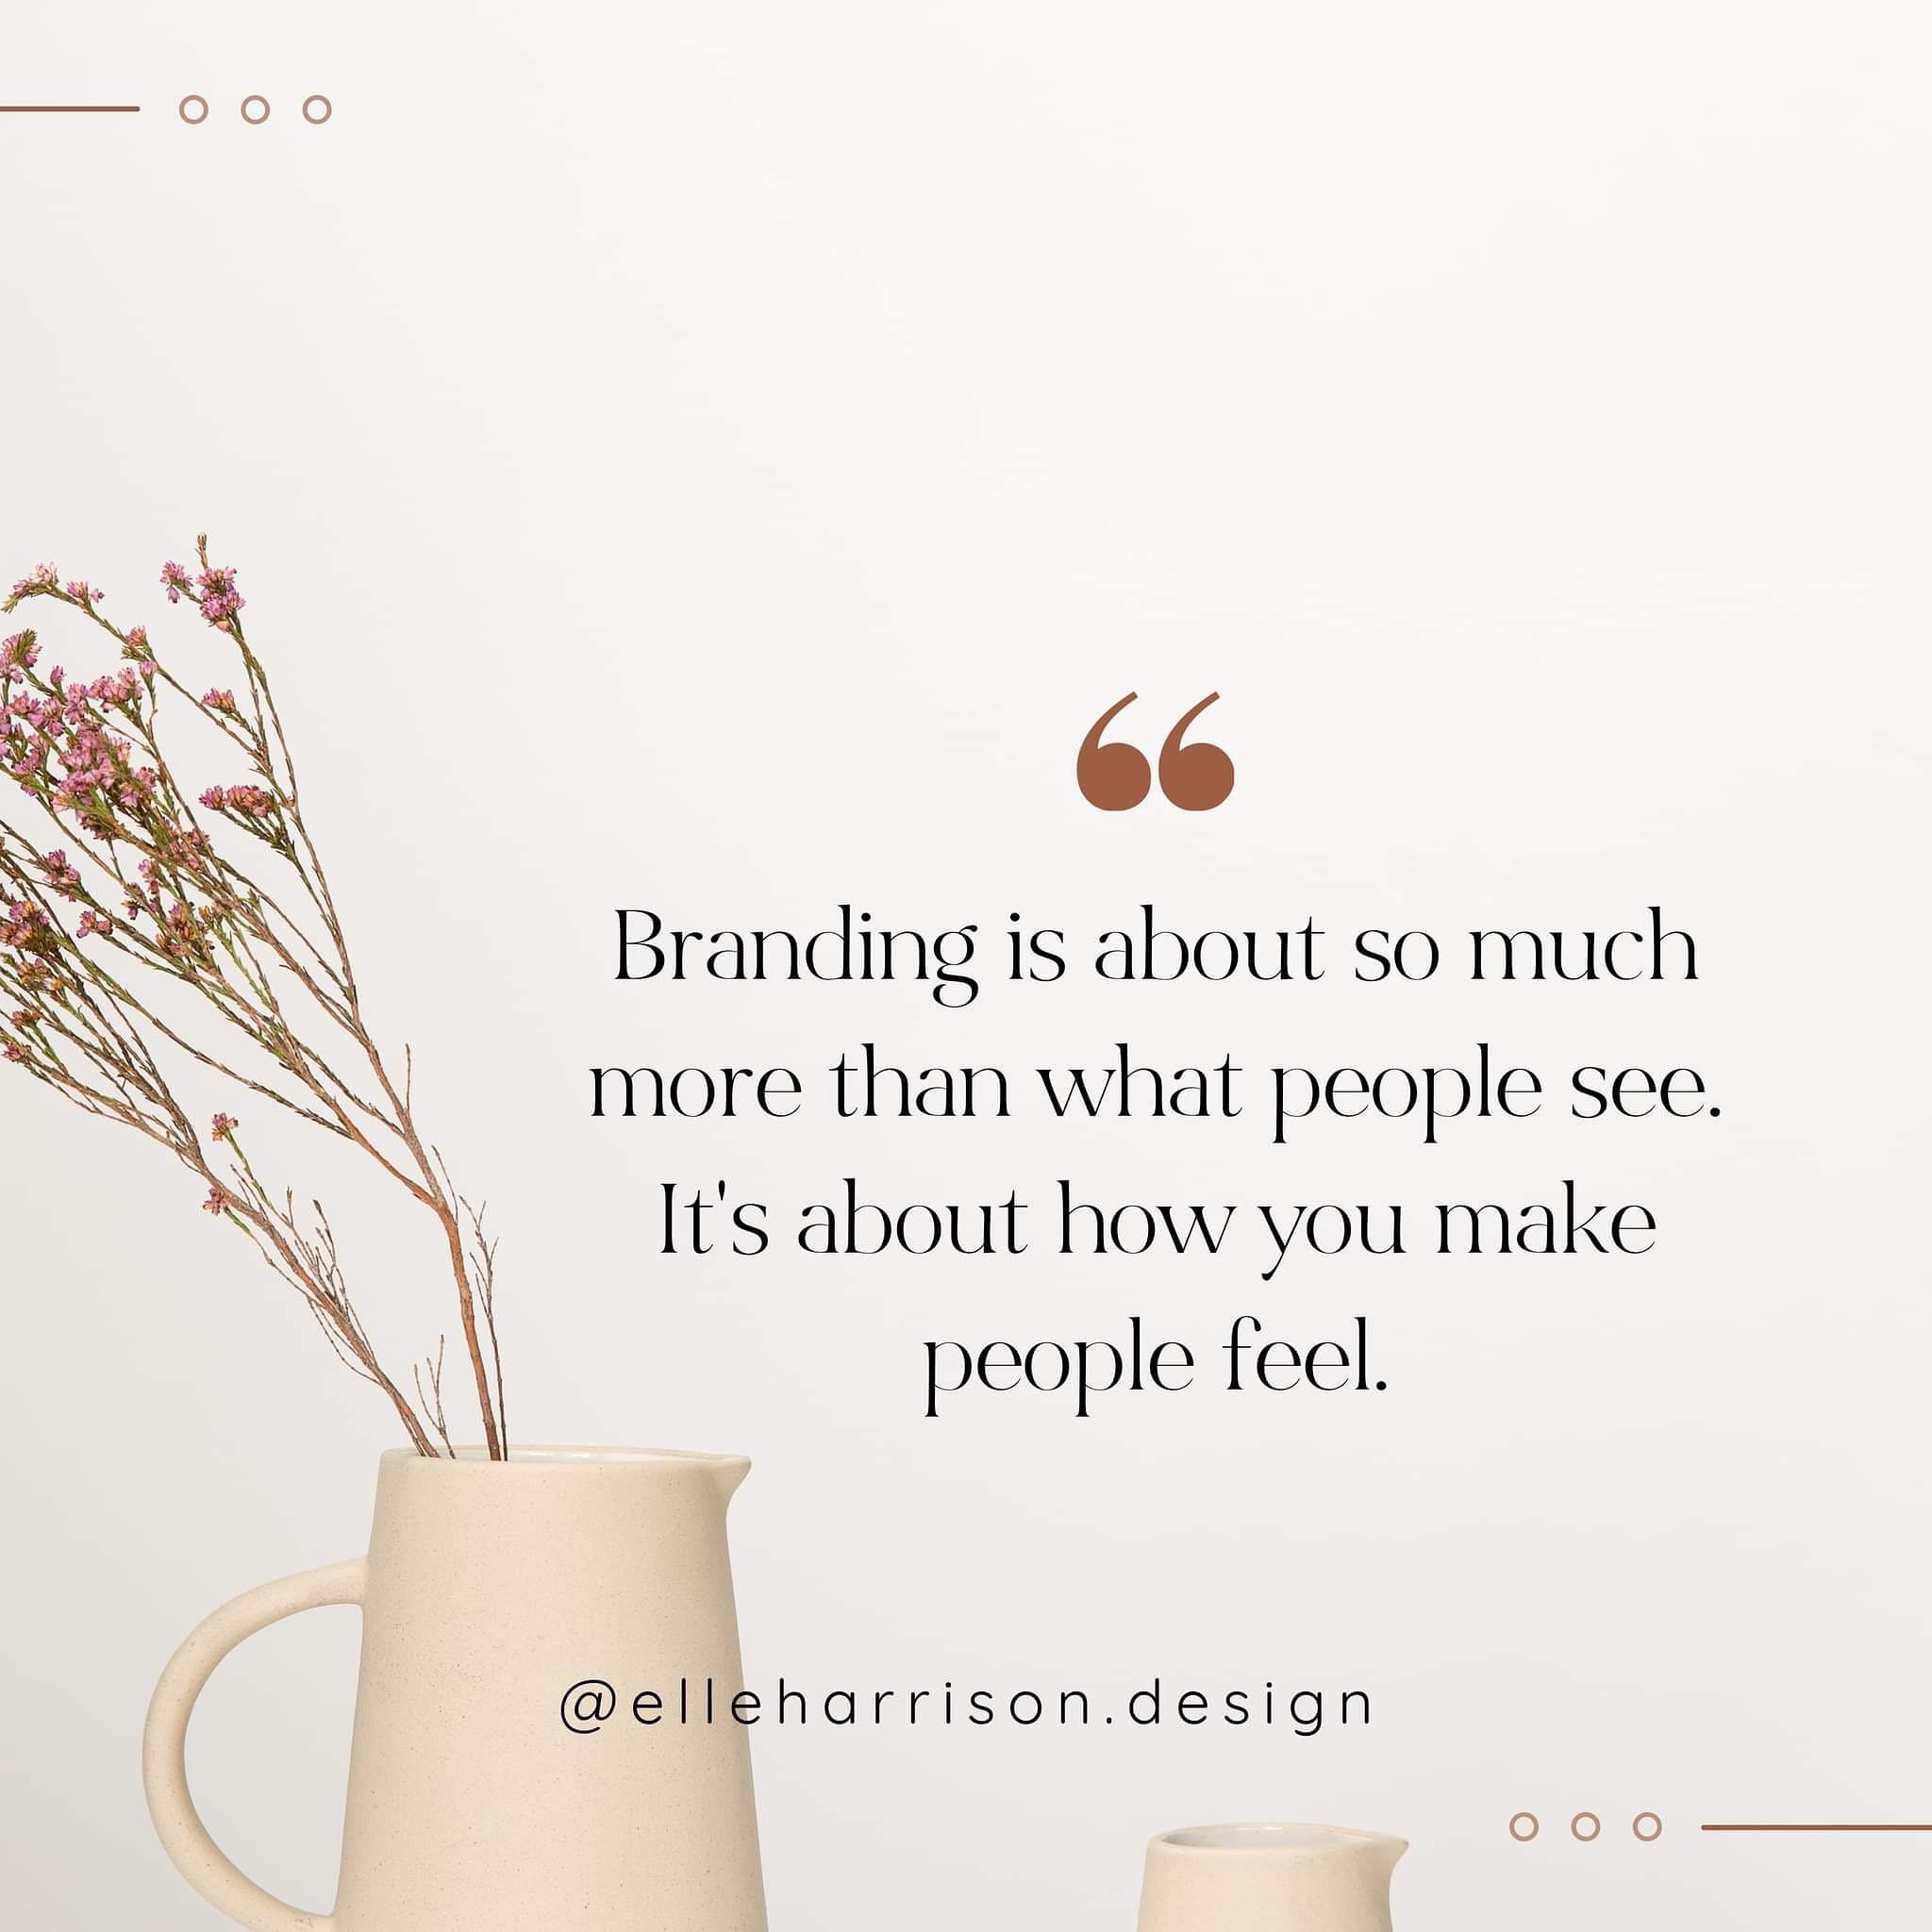 Think of your brand as a precious jewel - something you&rsquo;ve nurtured and carefully created with all of your heart and soul. 

It&rsquo;s not just a logo or a catchy tagline, it&rsquo;s more than that. It&rsquo;s the essence of your business, the